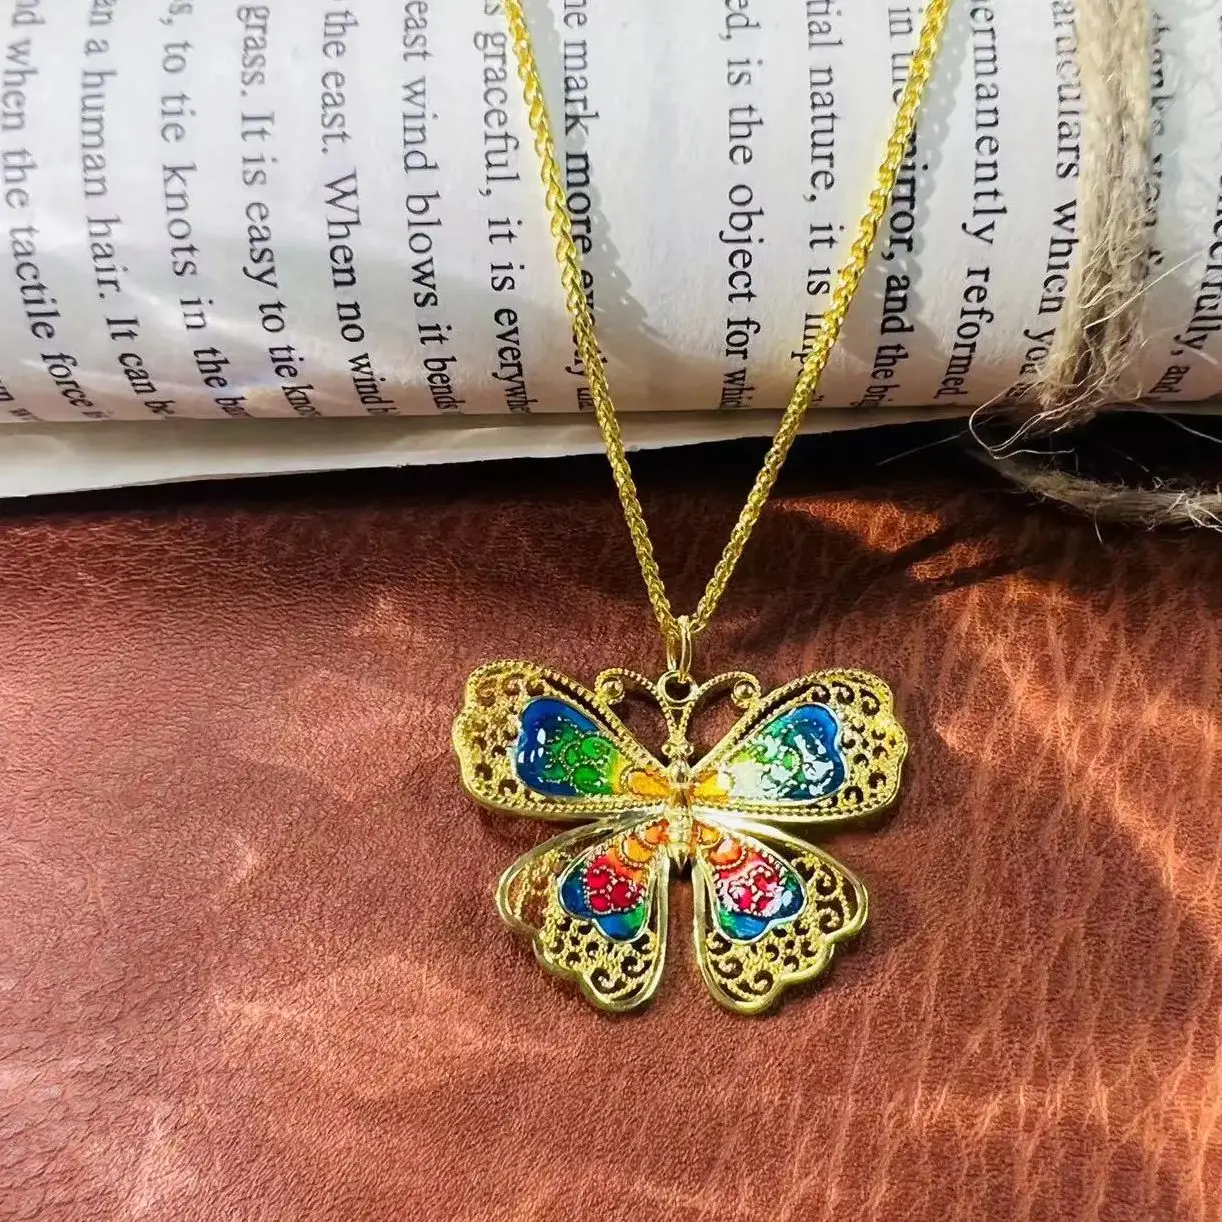 

Butterfly Series Antique Pendant Enamel Craft S925 Silver Filigree Necklace for Women